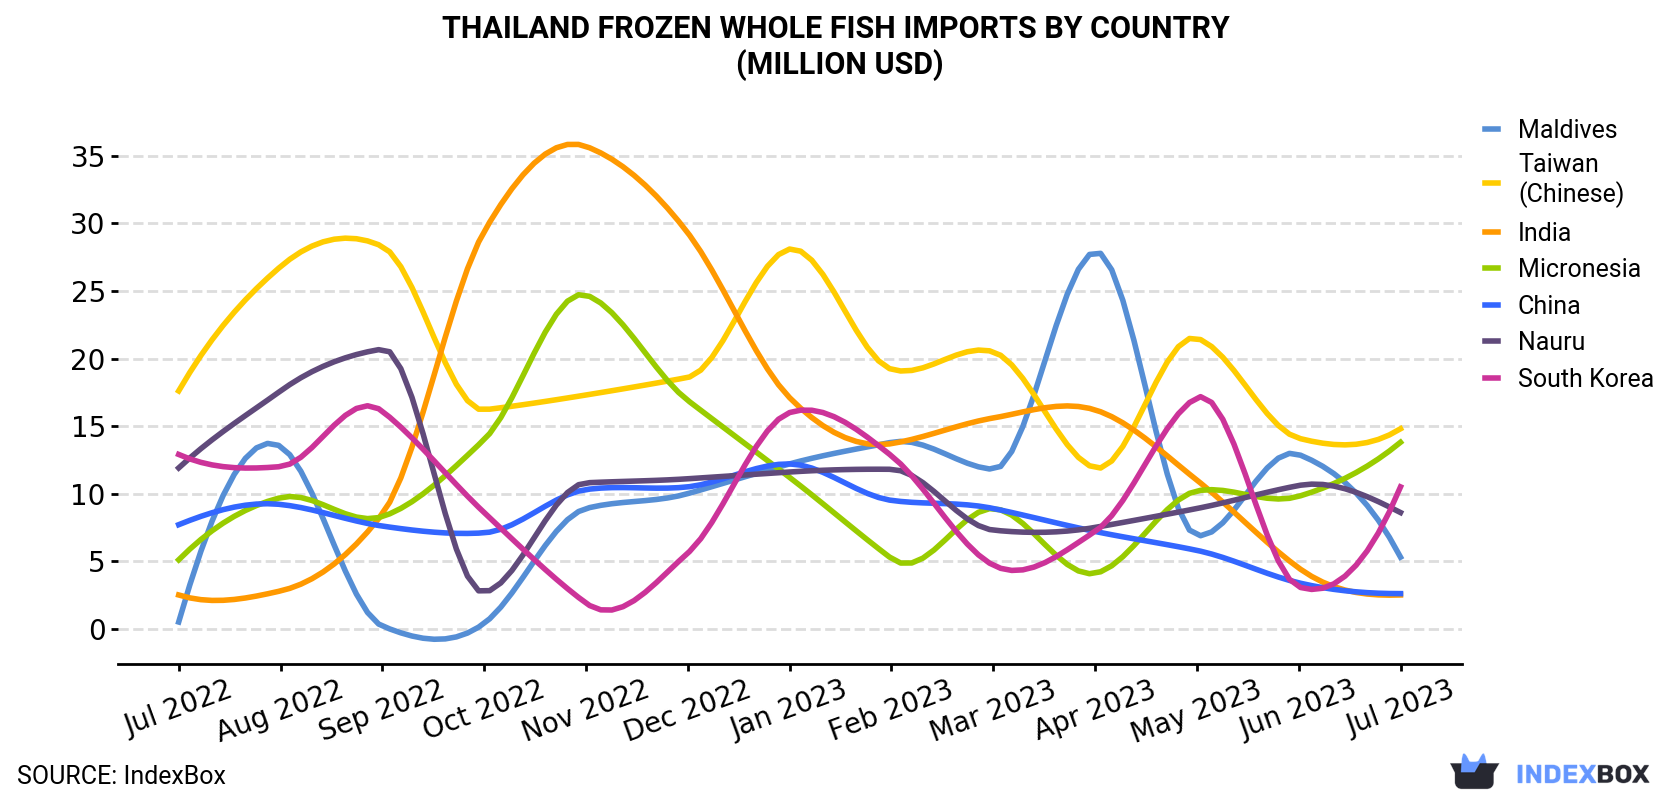 Thailand Frozen Whole Fish Imports By Country (Million USD)